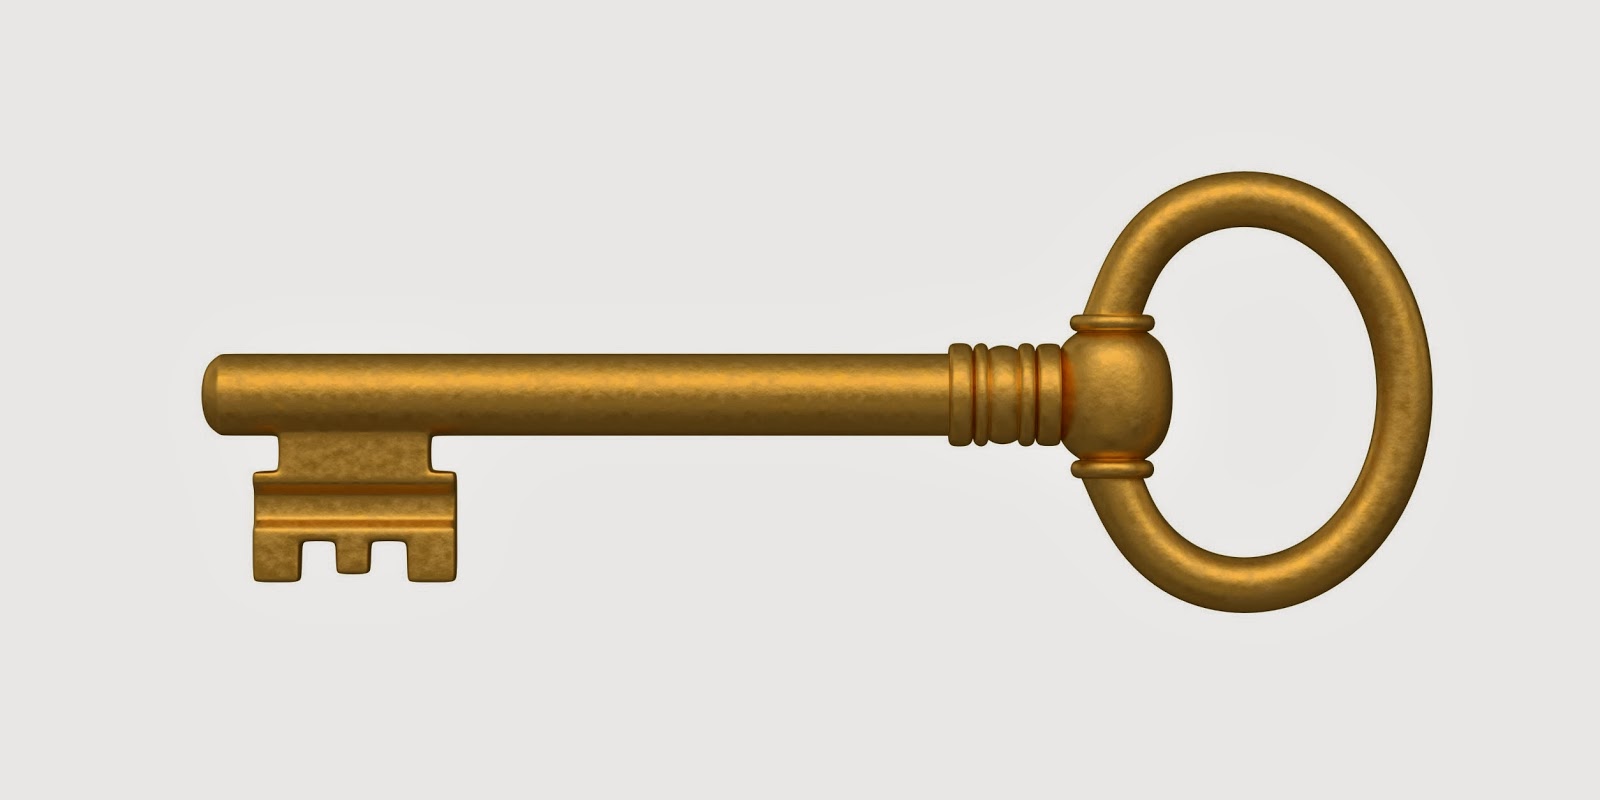 Gold silver key clipart